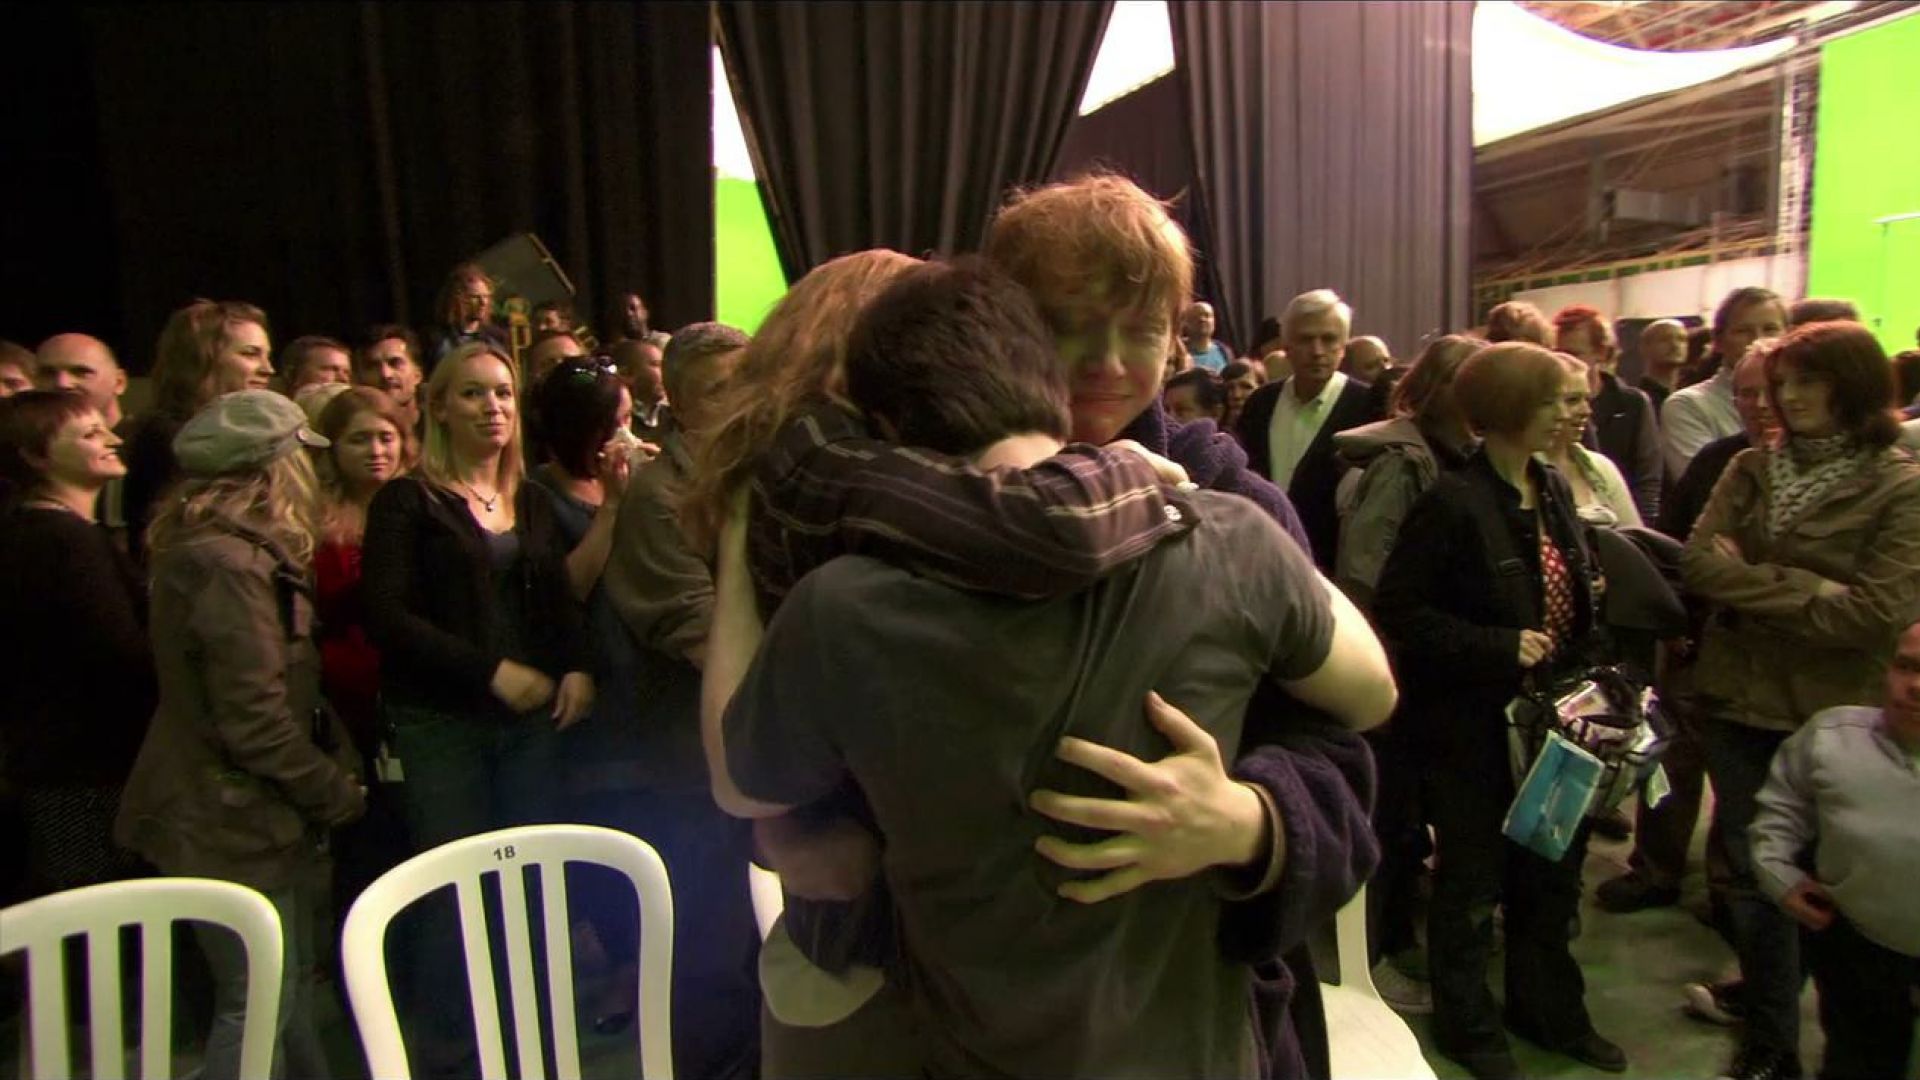 Last day on set. The Harry Potter cast and crew say goodbye